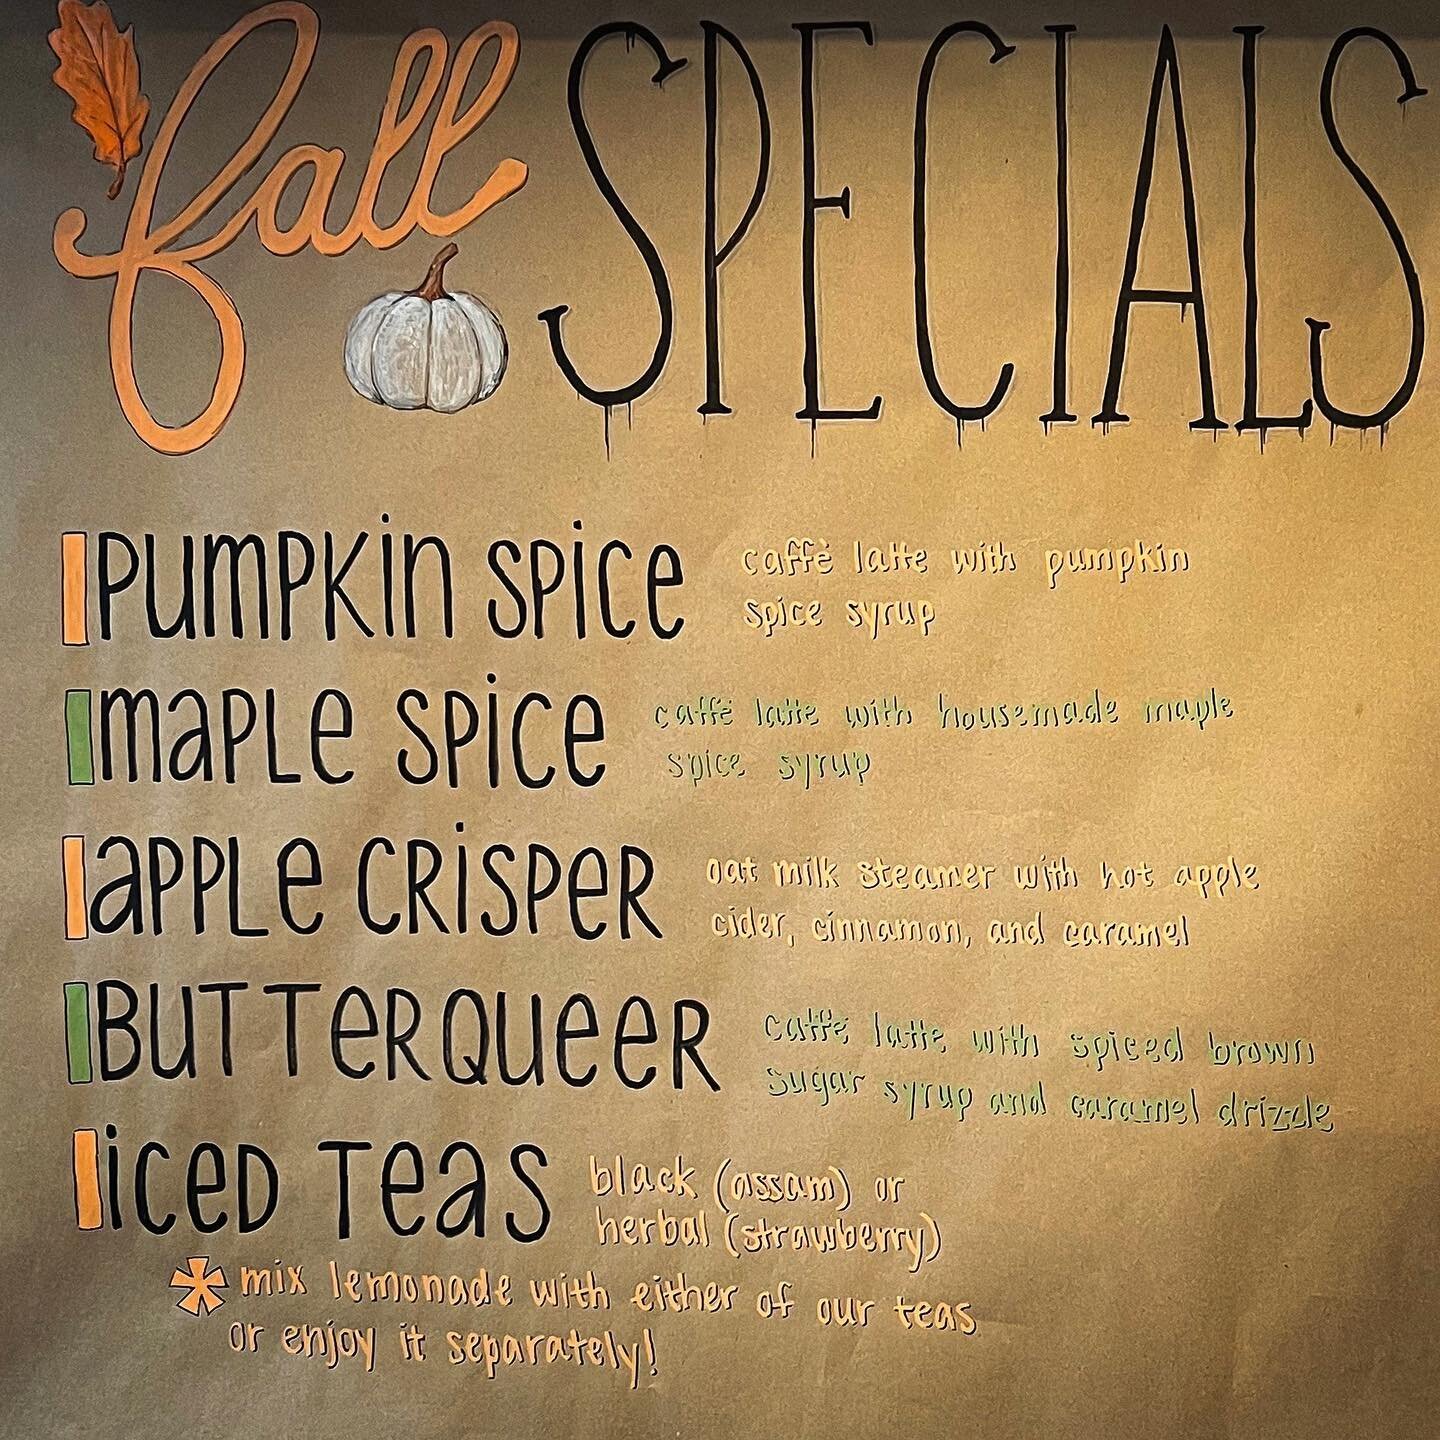 .
#Autumn 2023 Drink Specials 😋
#MonVertCaf&eacute; #DrinkSpecials ☕️
#Coffee #Caf&eacute;Life #Autumn2023
#September2023 #WoodstockVT
@wlsterling #ThankYou for your
great line work on this!! #Artistic 
#Art #CoffeeTime #TeaTime #🫖
#WoodstockVermon